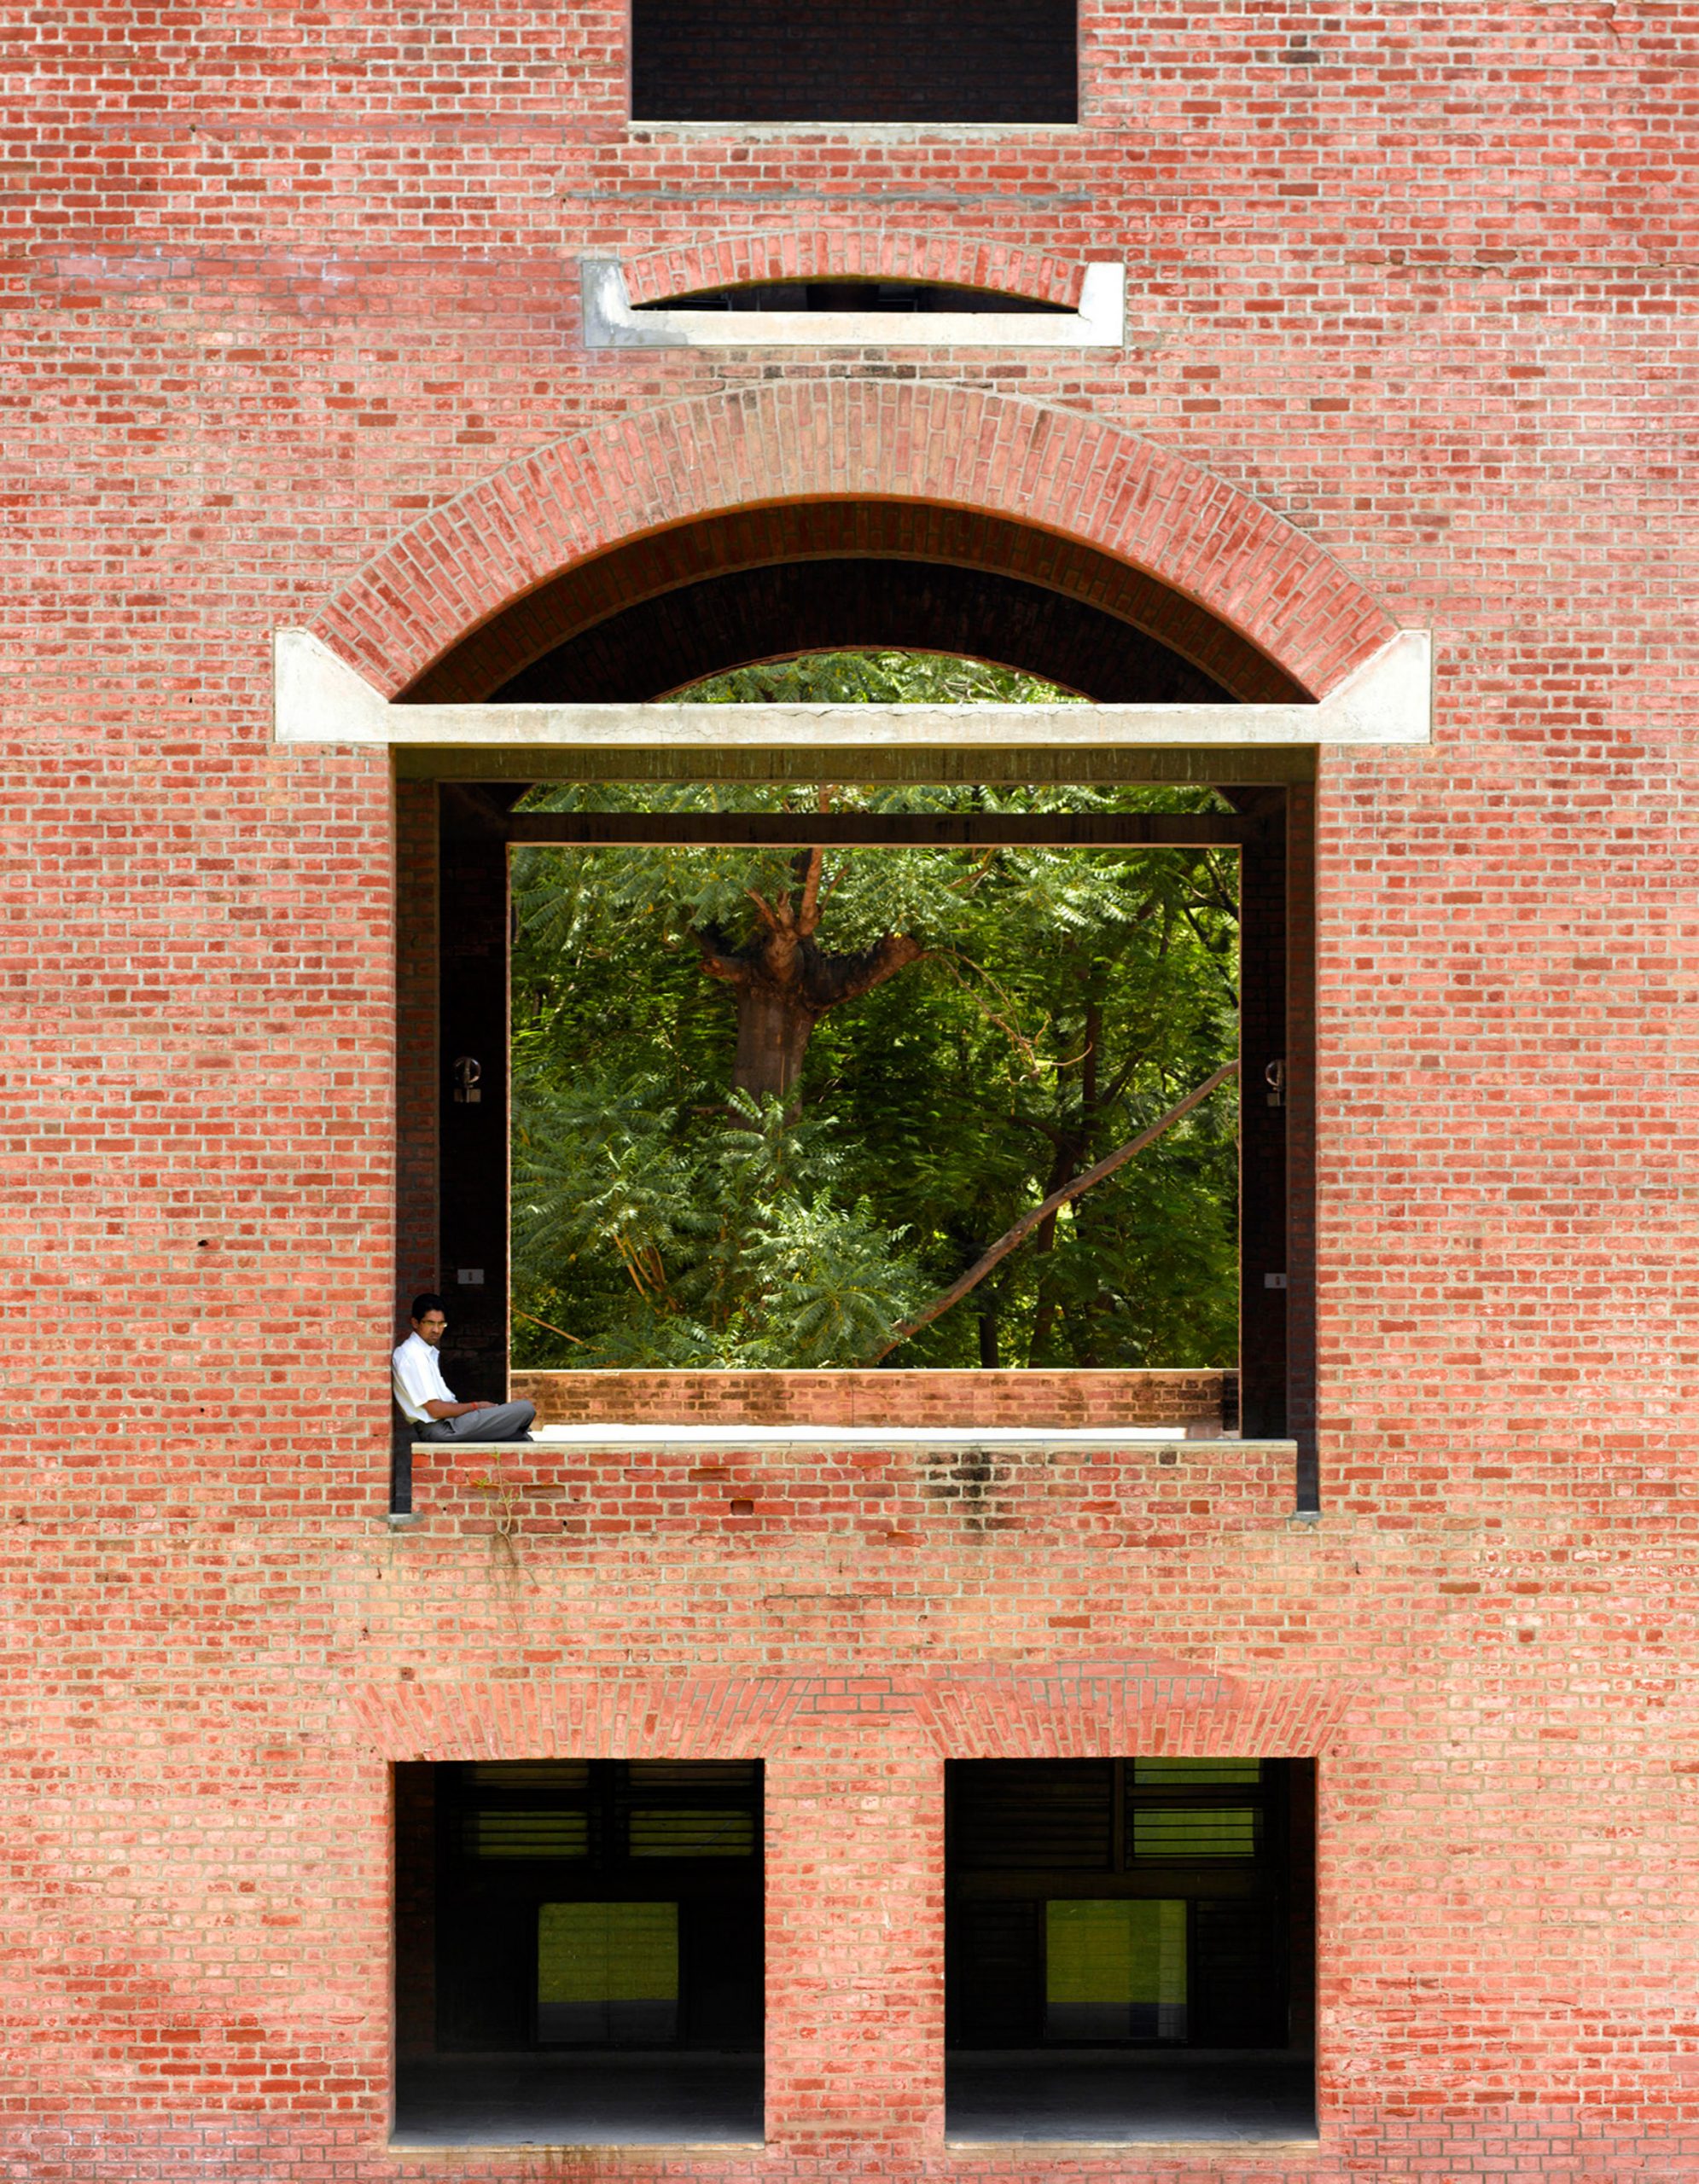 Indian Institute of Management Ahmedabad by architect Louis Kahn